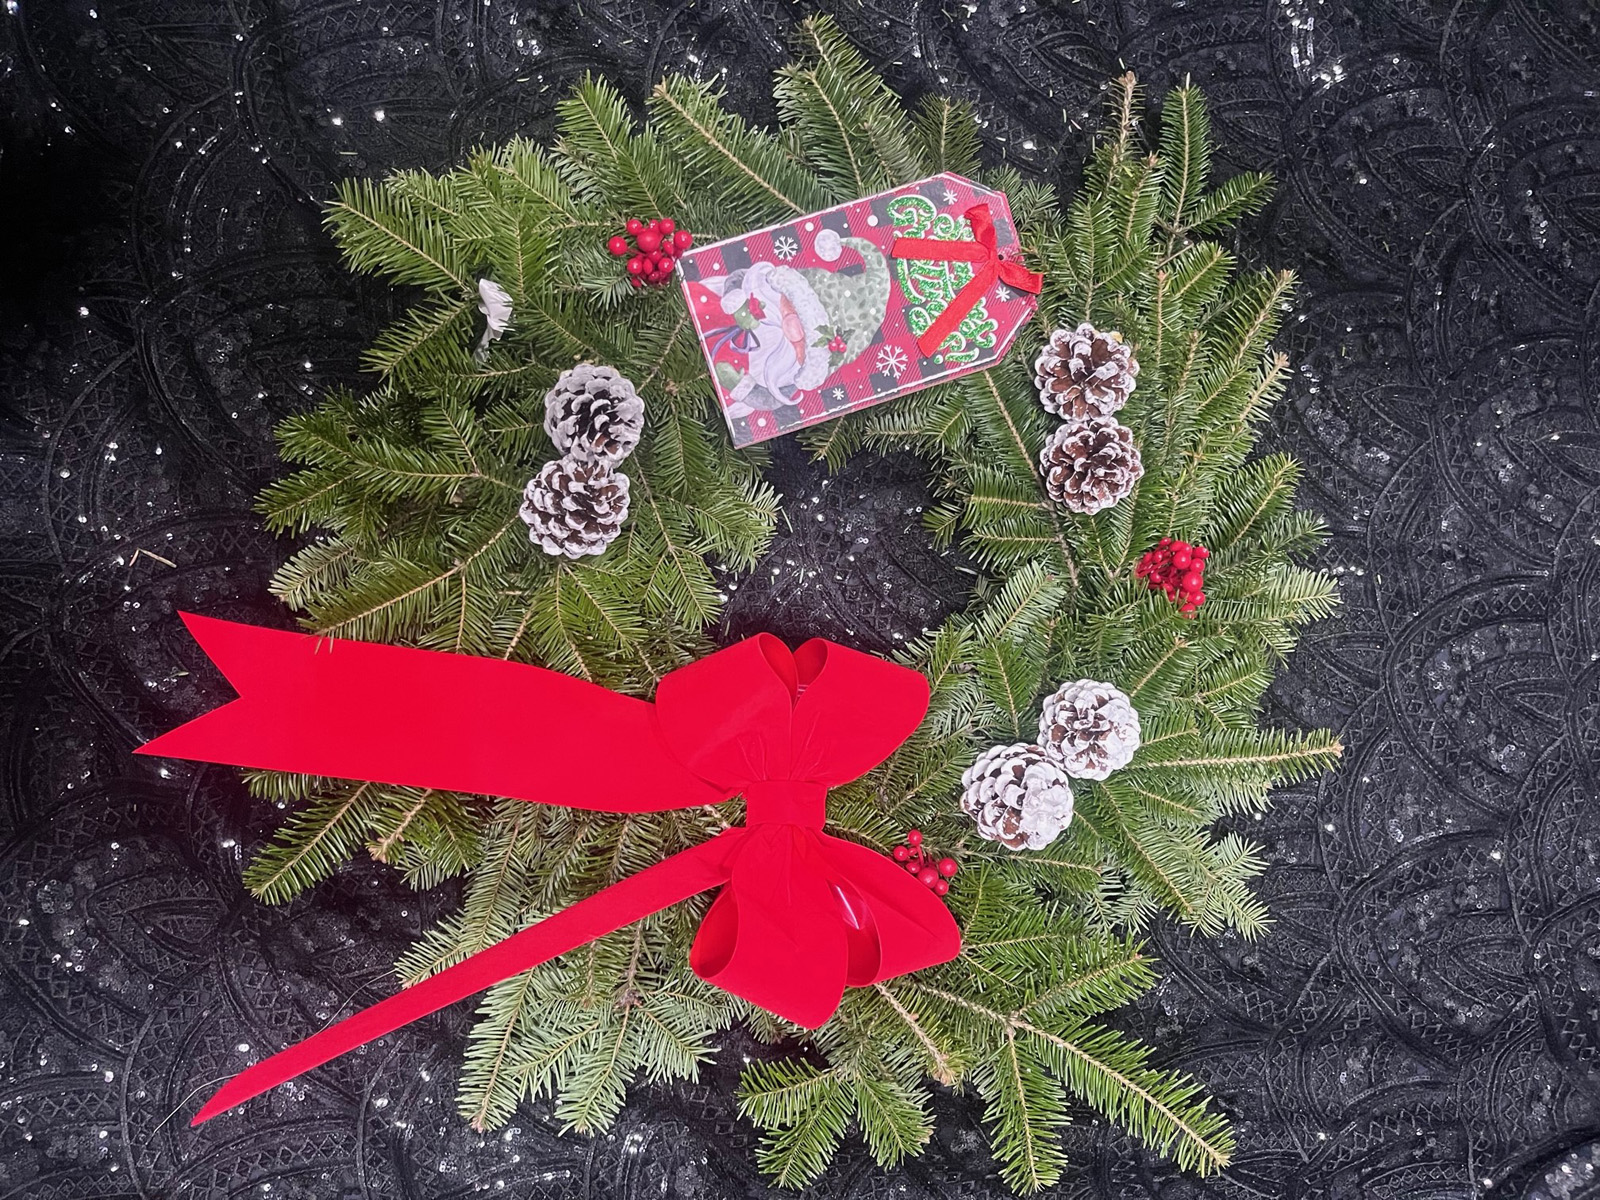 You will find the largest selection of all types of wreaths, greens, roping, garland and boughs in the area right here at Goffle Brook Farms in Ridgewood.